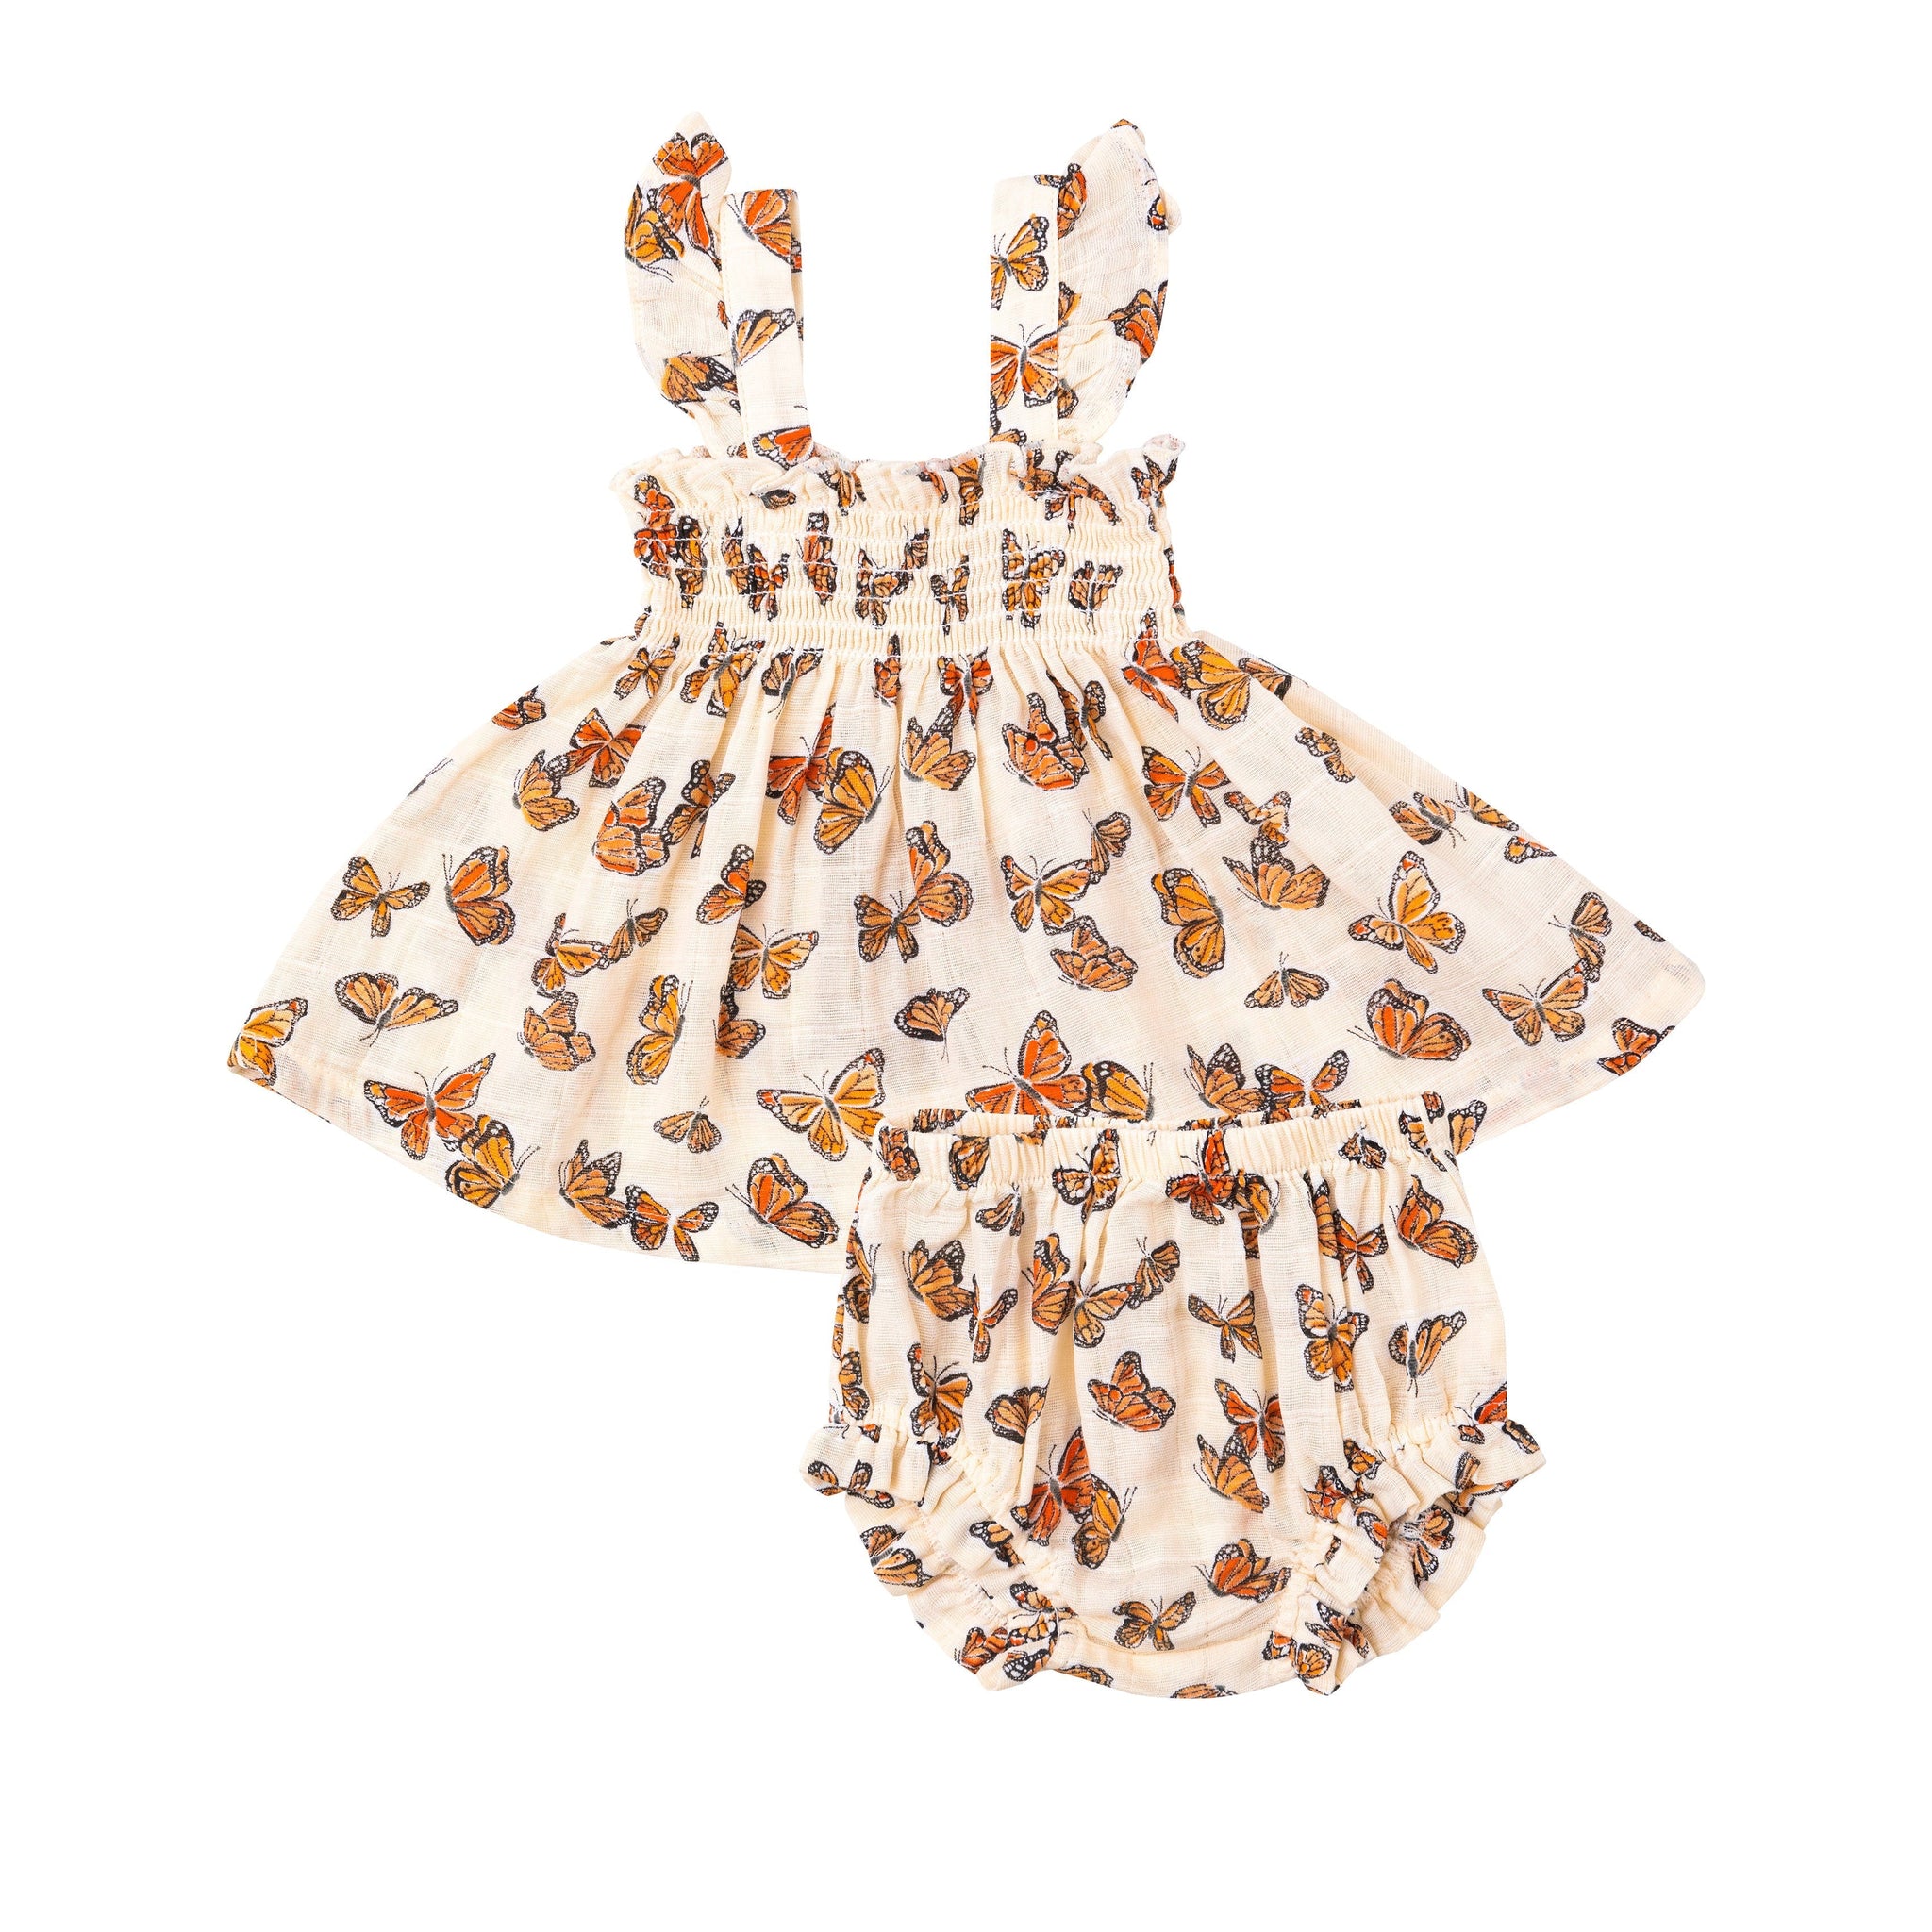 Ruffle Strap Smocked Top And Diaper Cover - Painted Monarch Butterflies